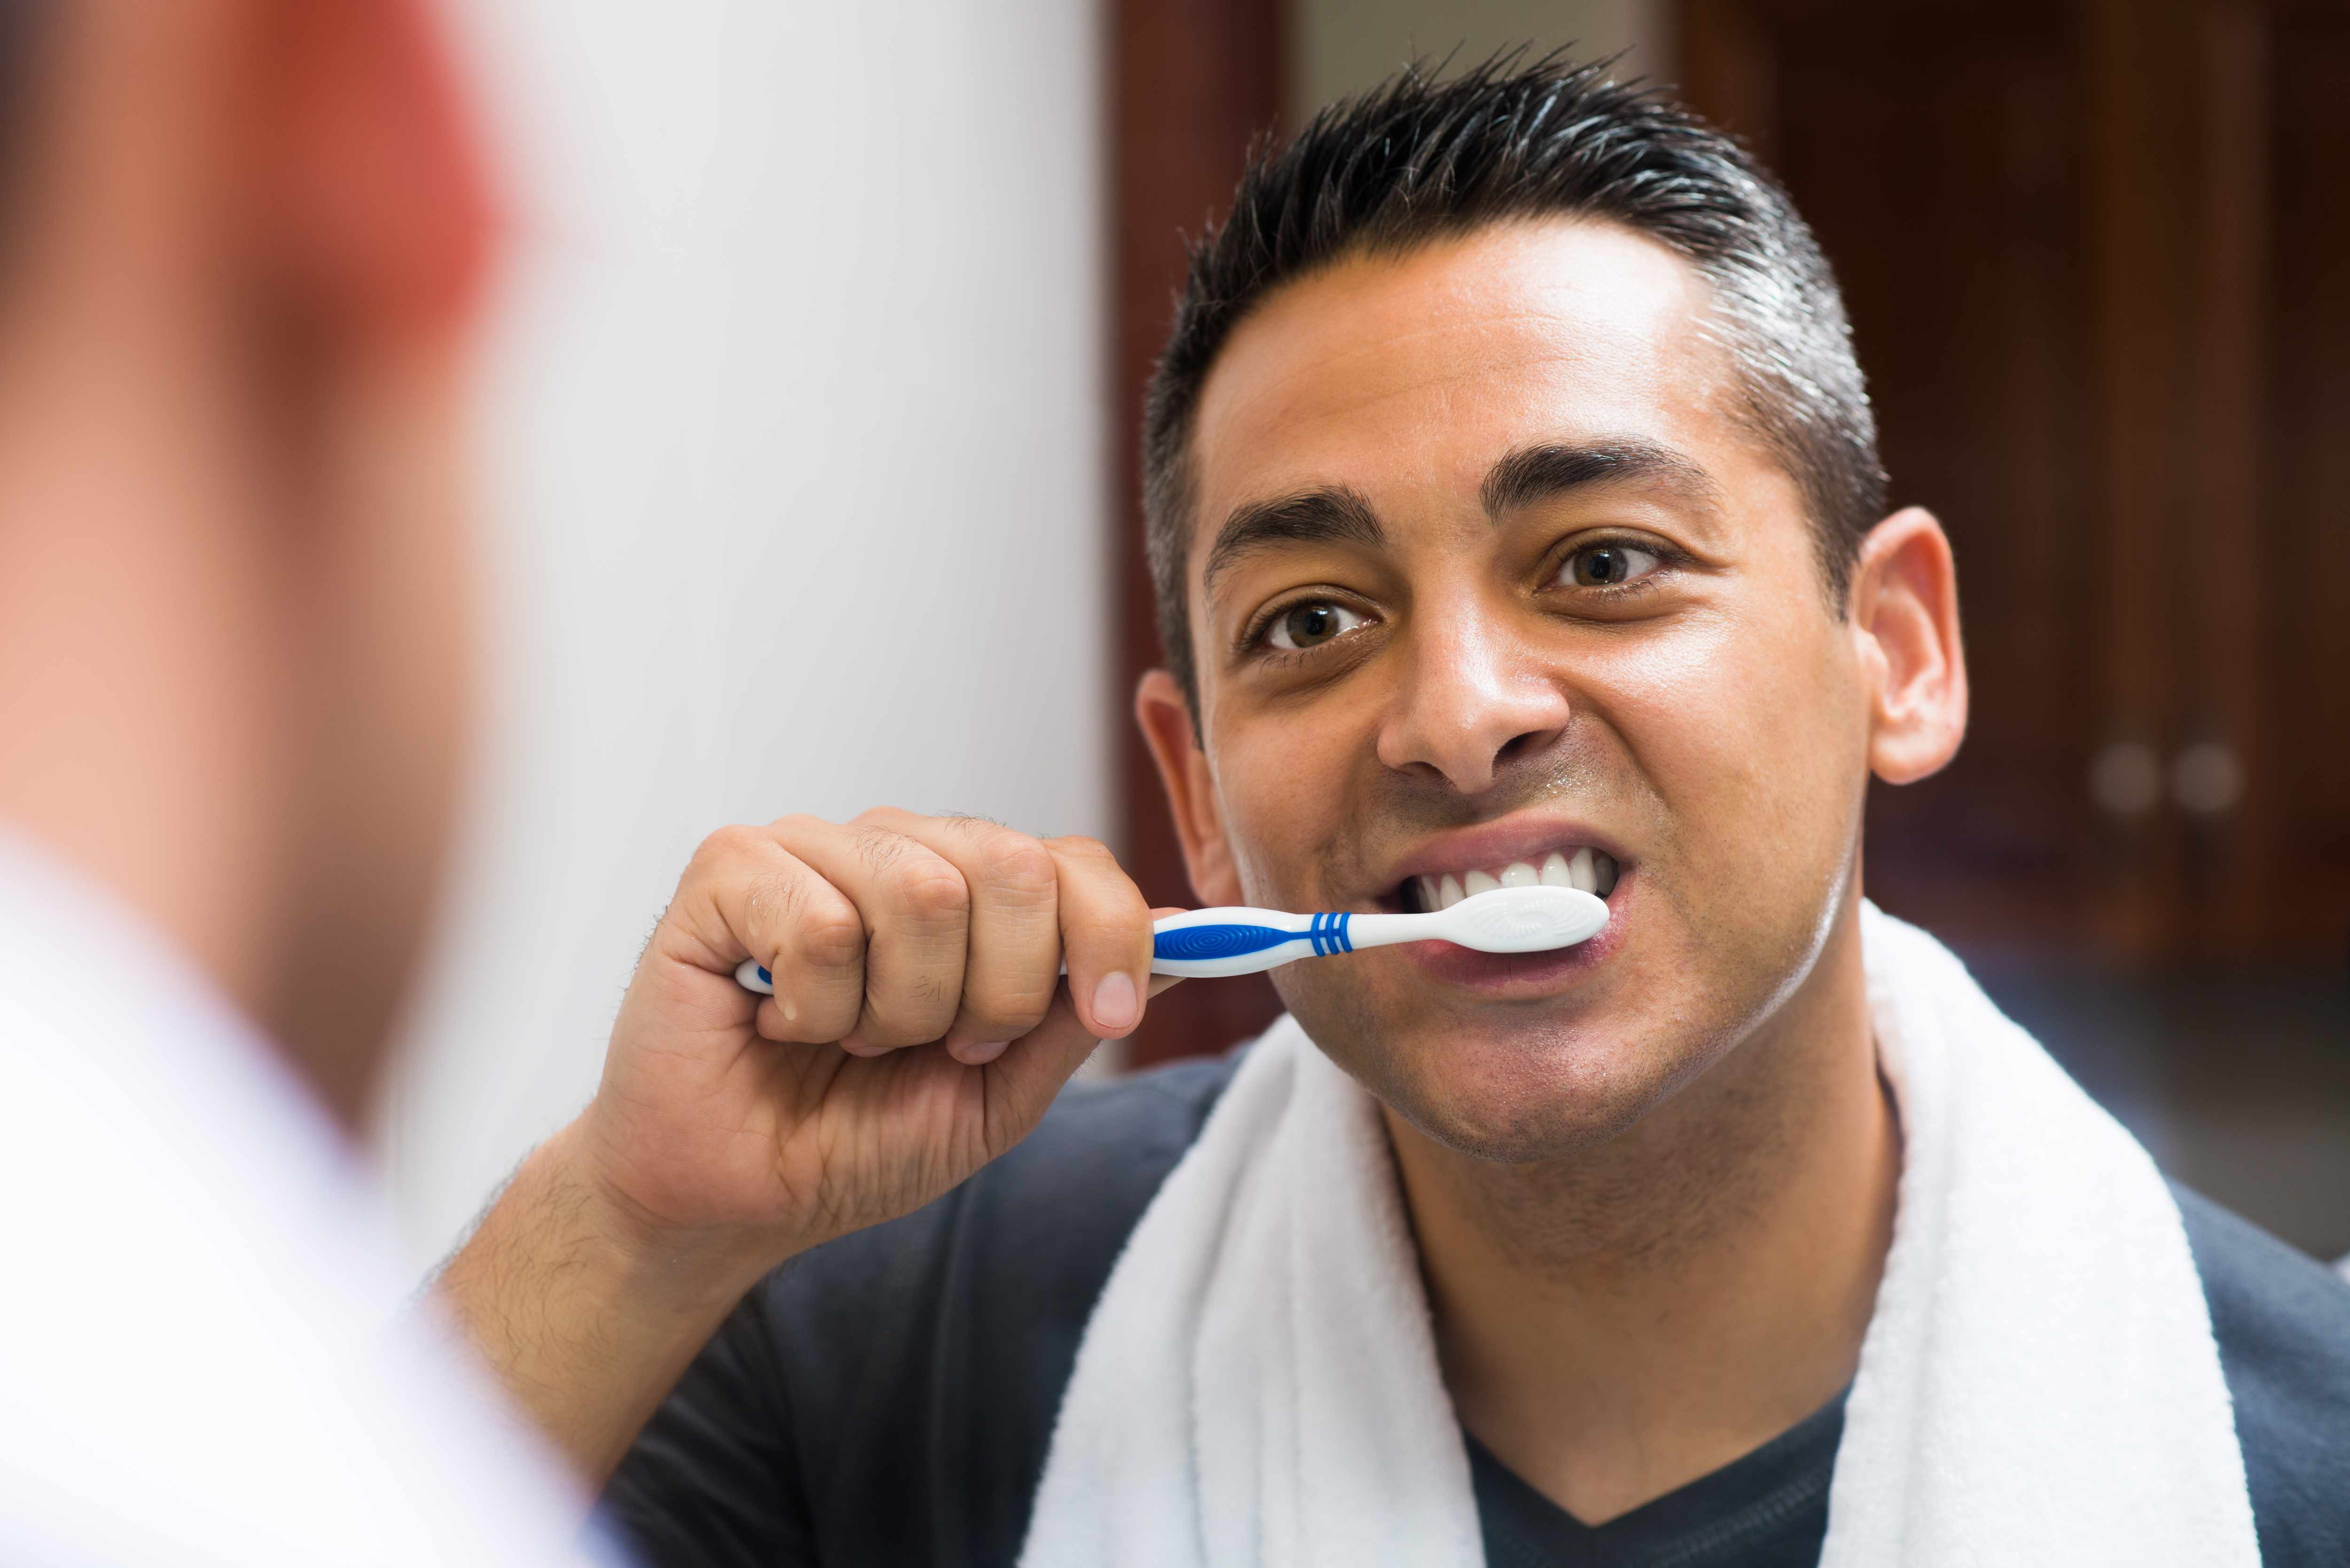 a man looking in a bathroom mirror and brushing his teeth